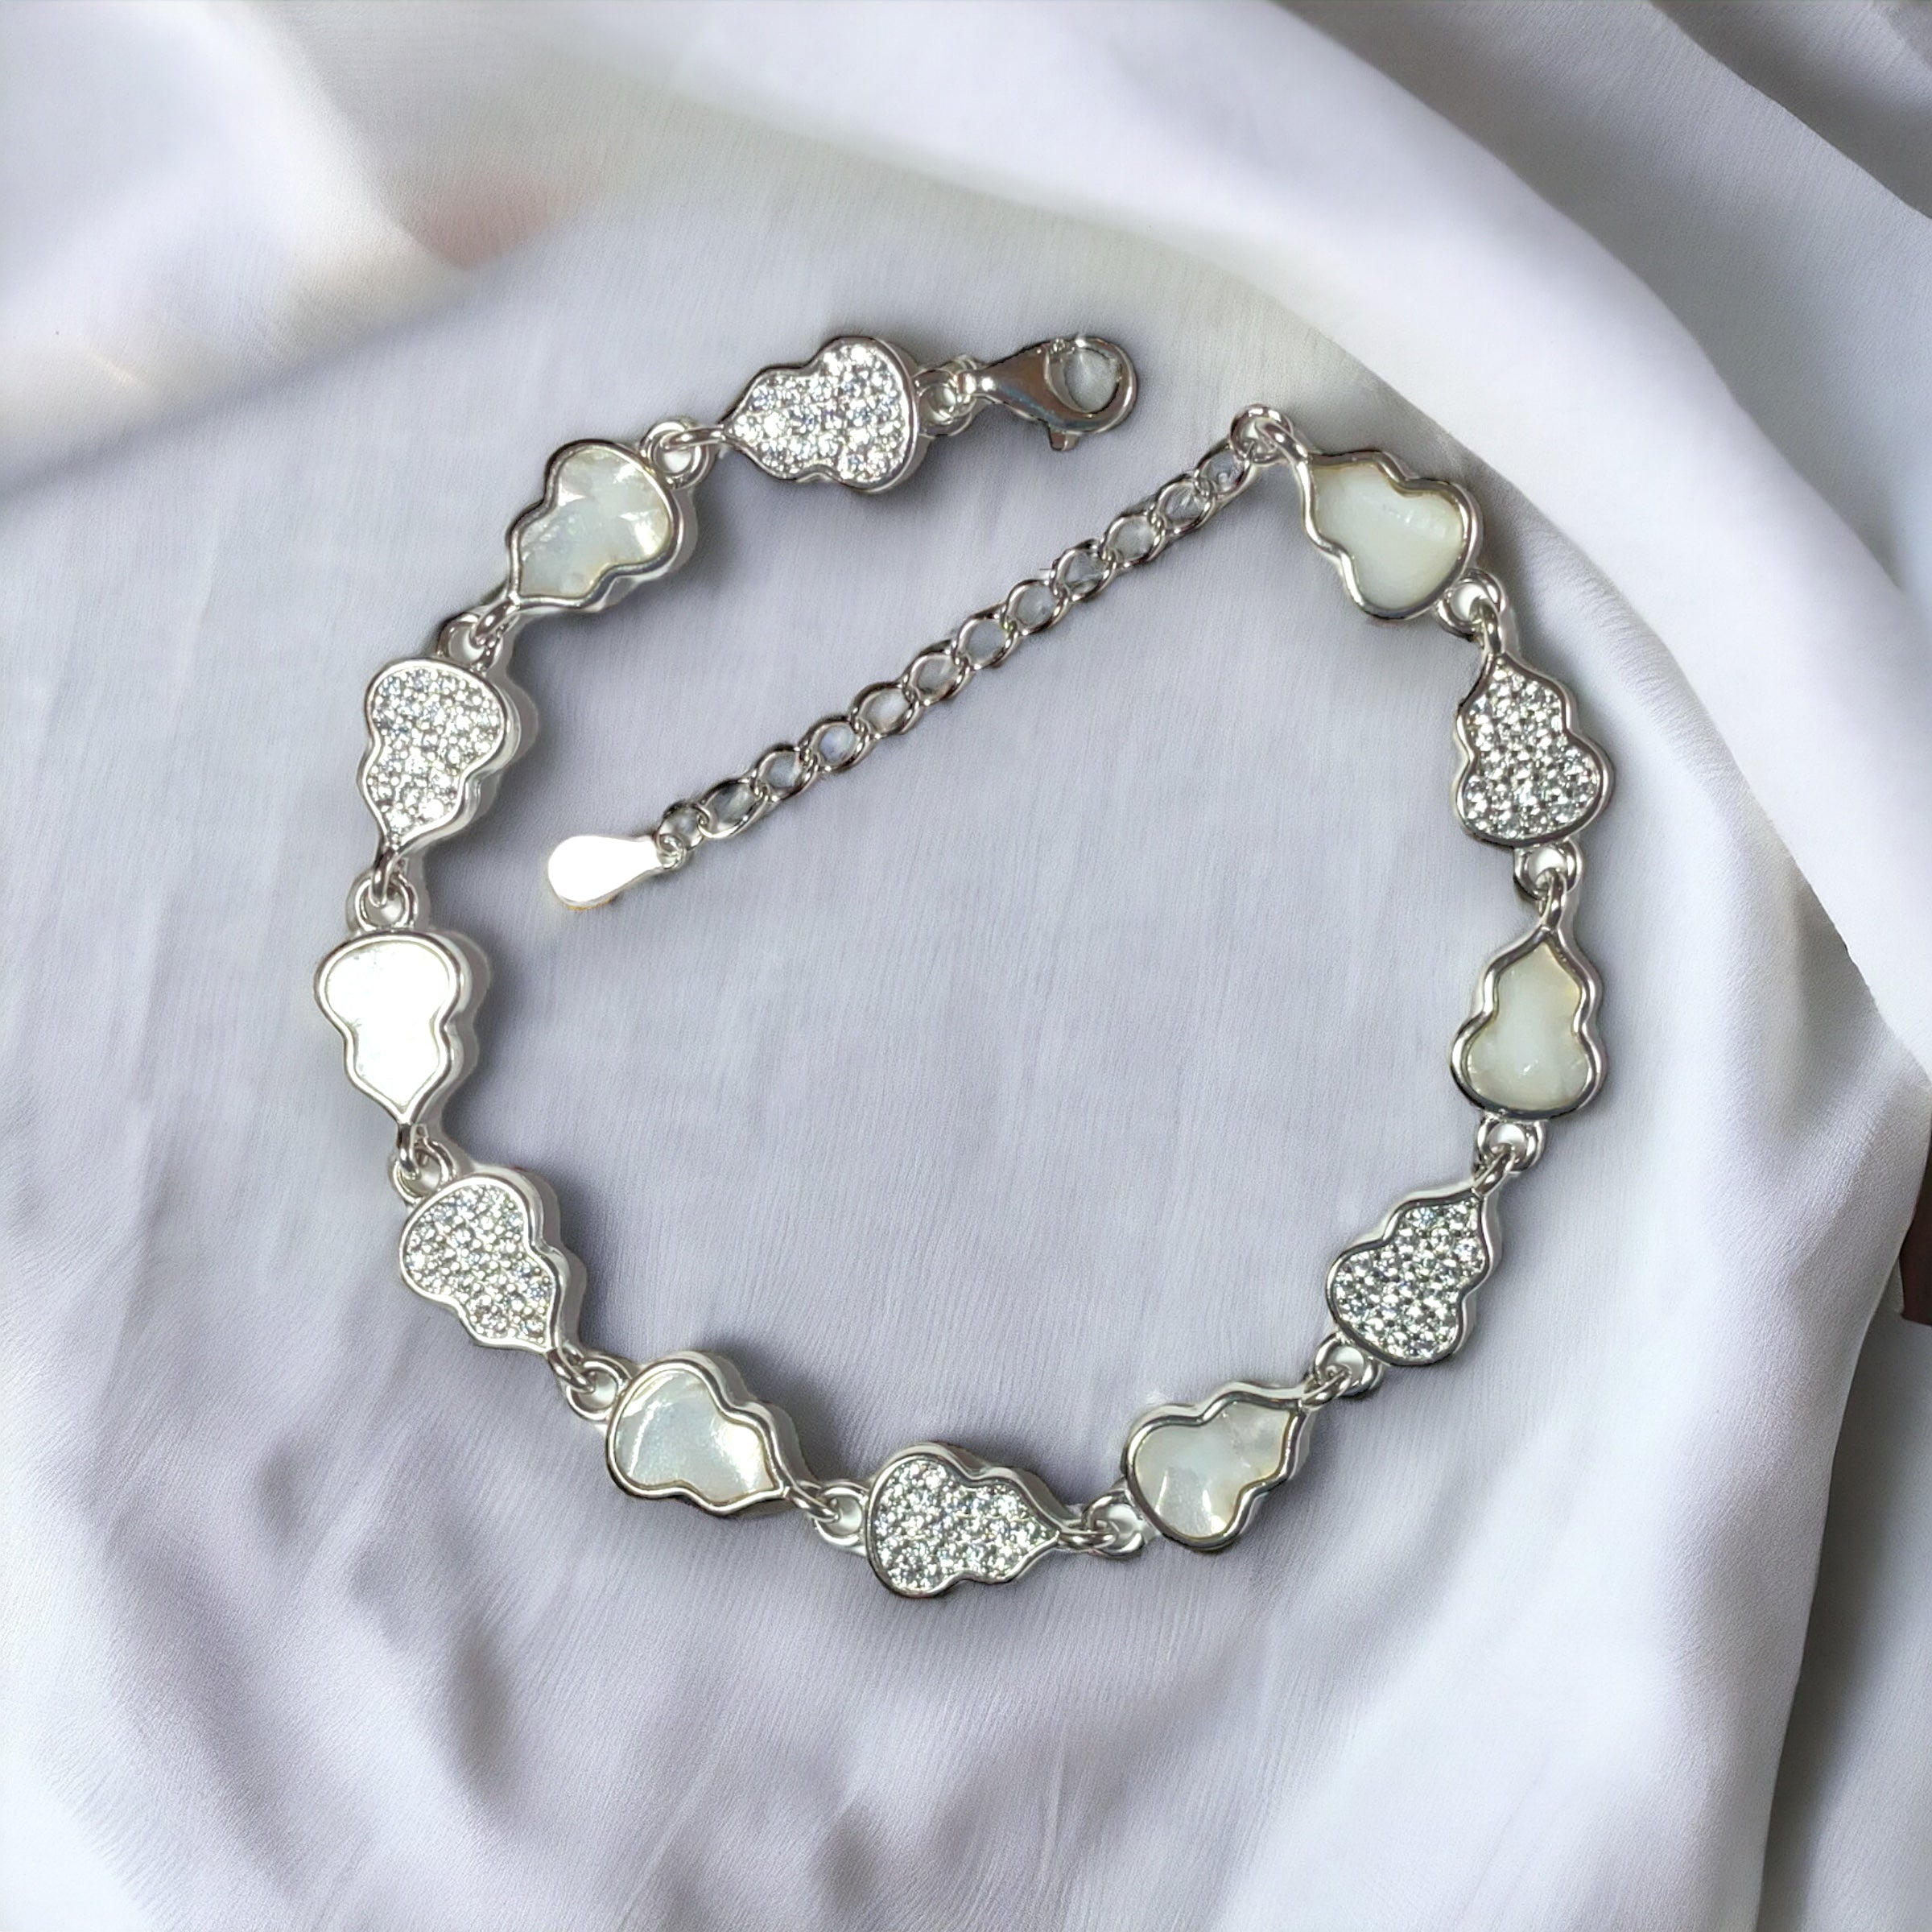 a silver bracelet with hearts on it